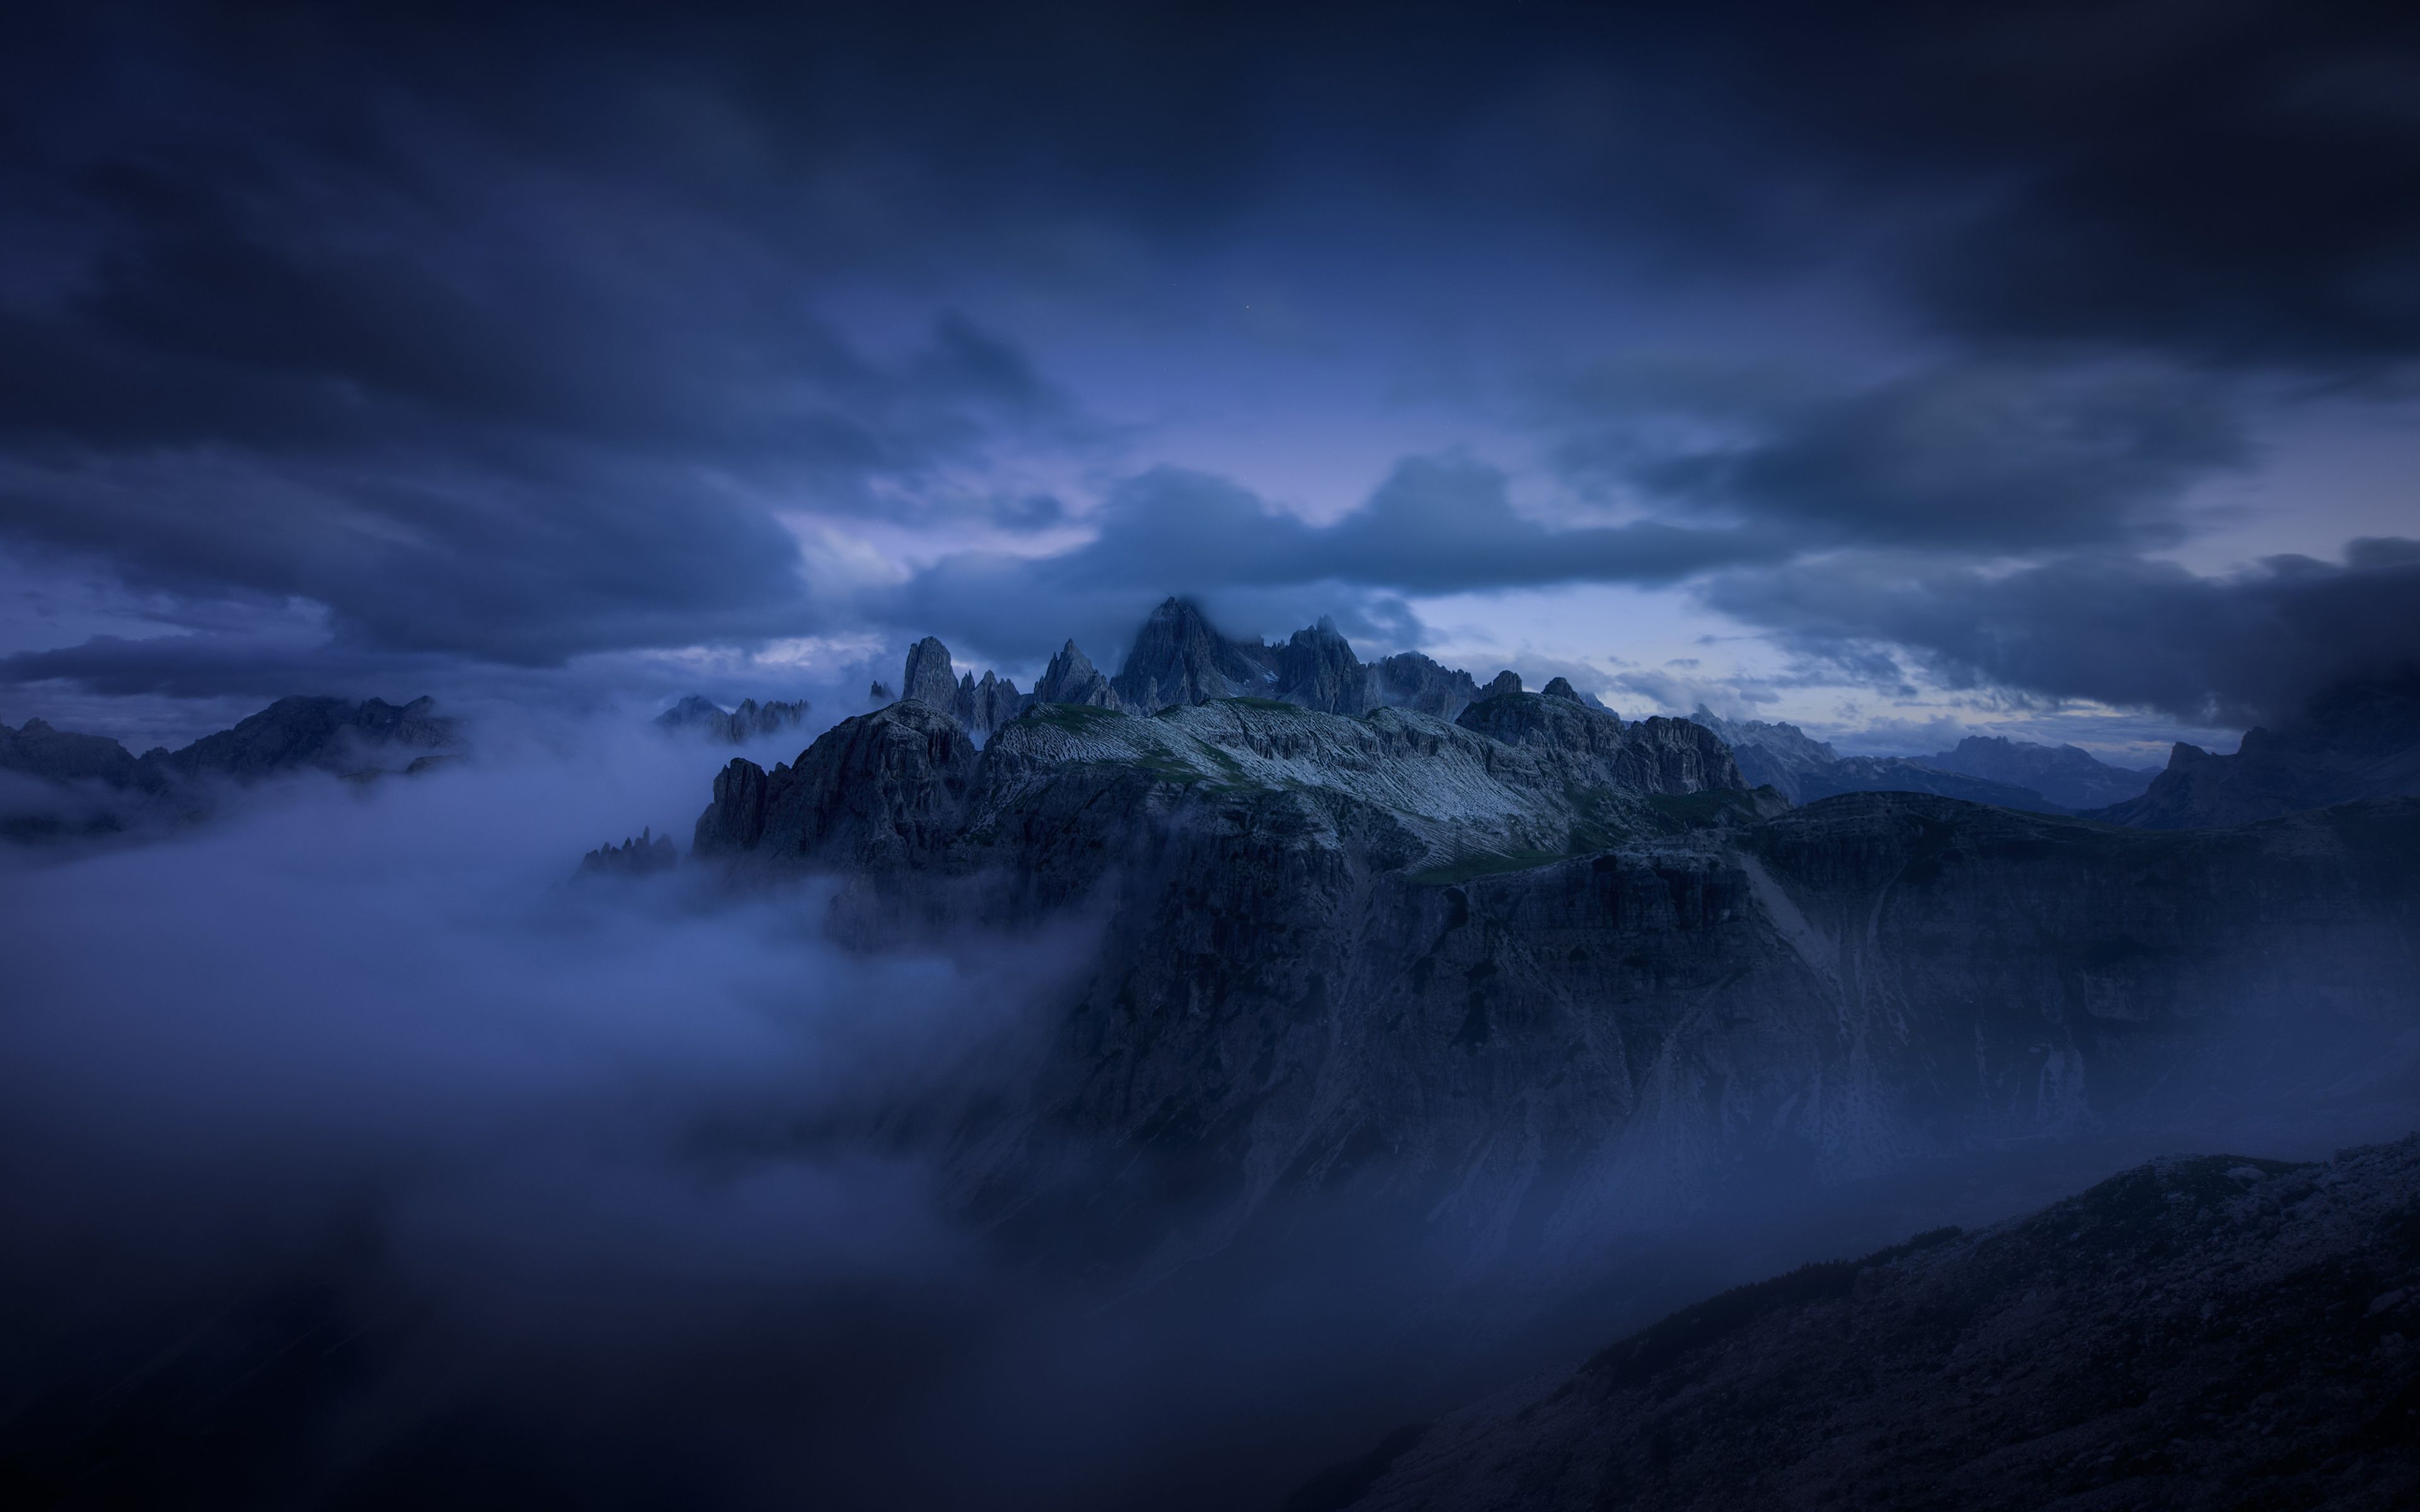 Dark Clouds over the Mountains 4k Ultra HD Wallpaper. Background